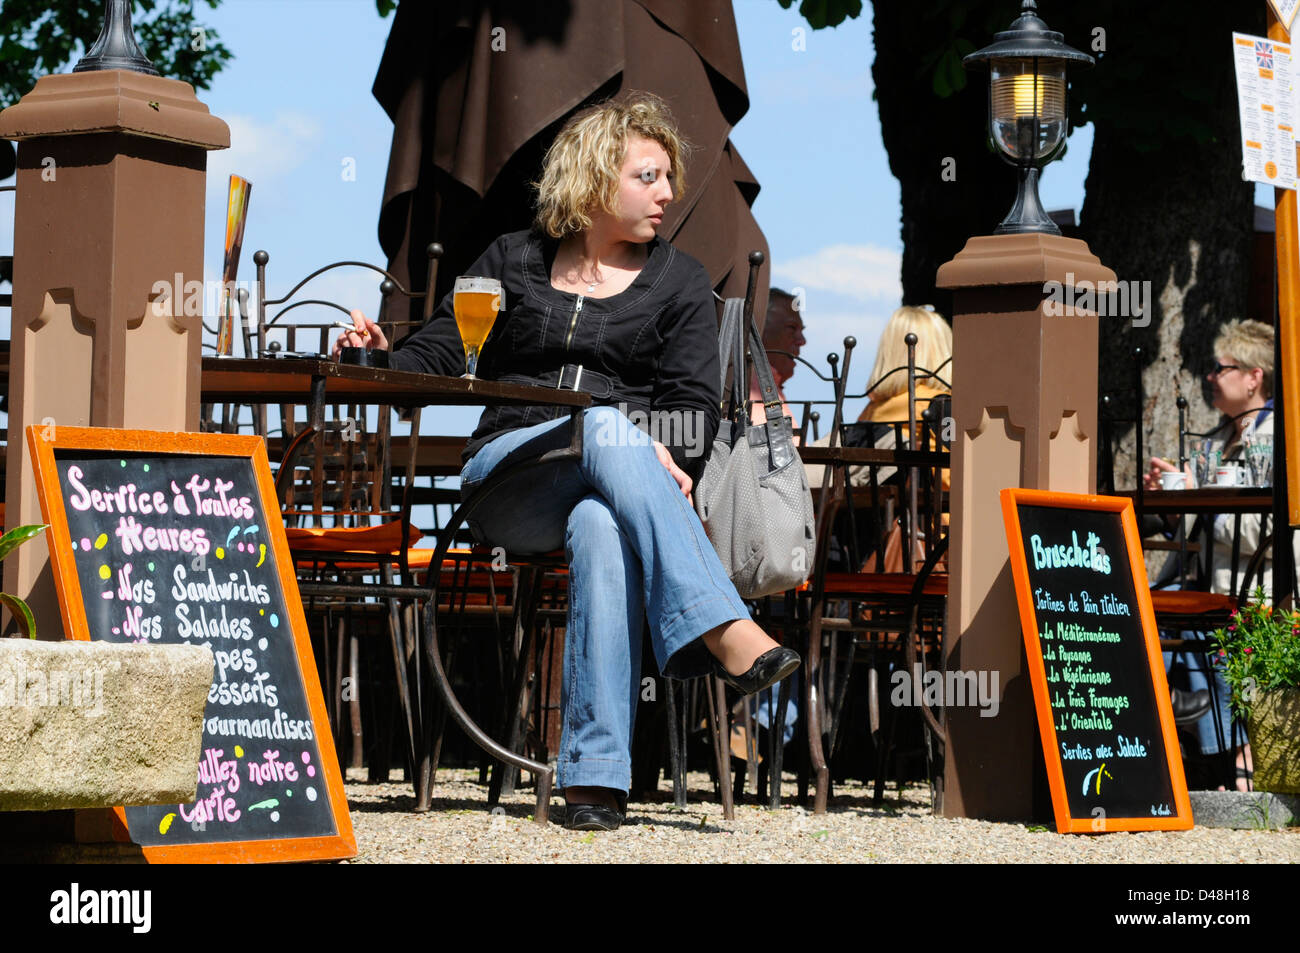 New laws mean that smokers are now forced to smoke outside cafés and restaurants in France. Codes, Tarn, France Stock Photo